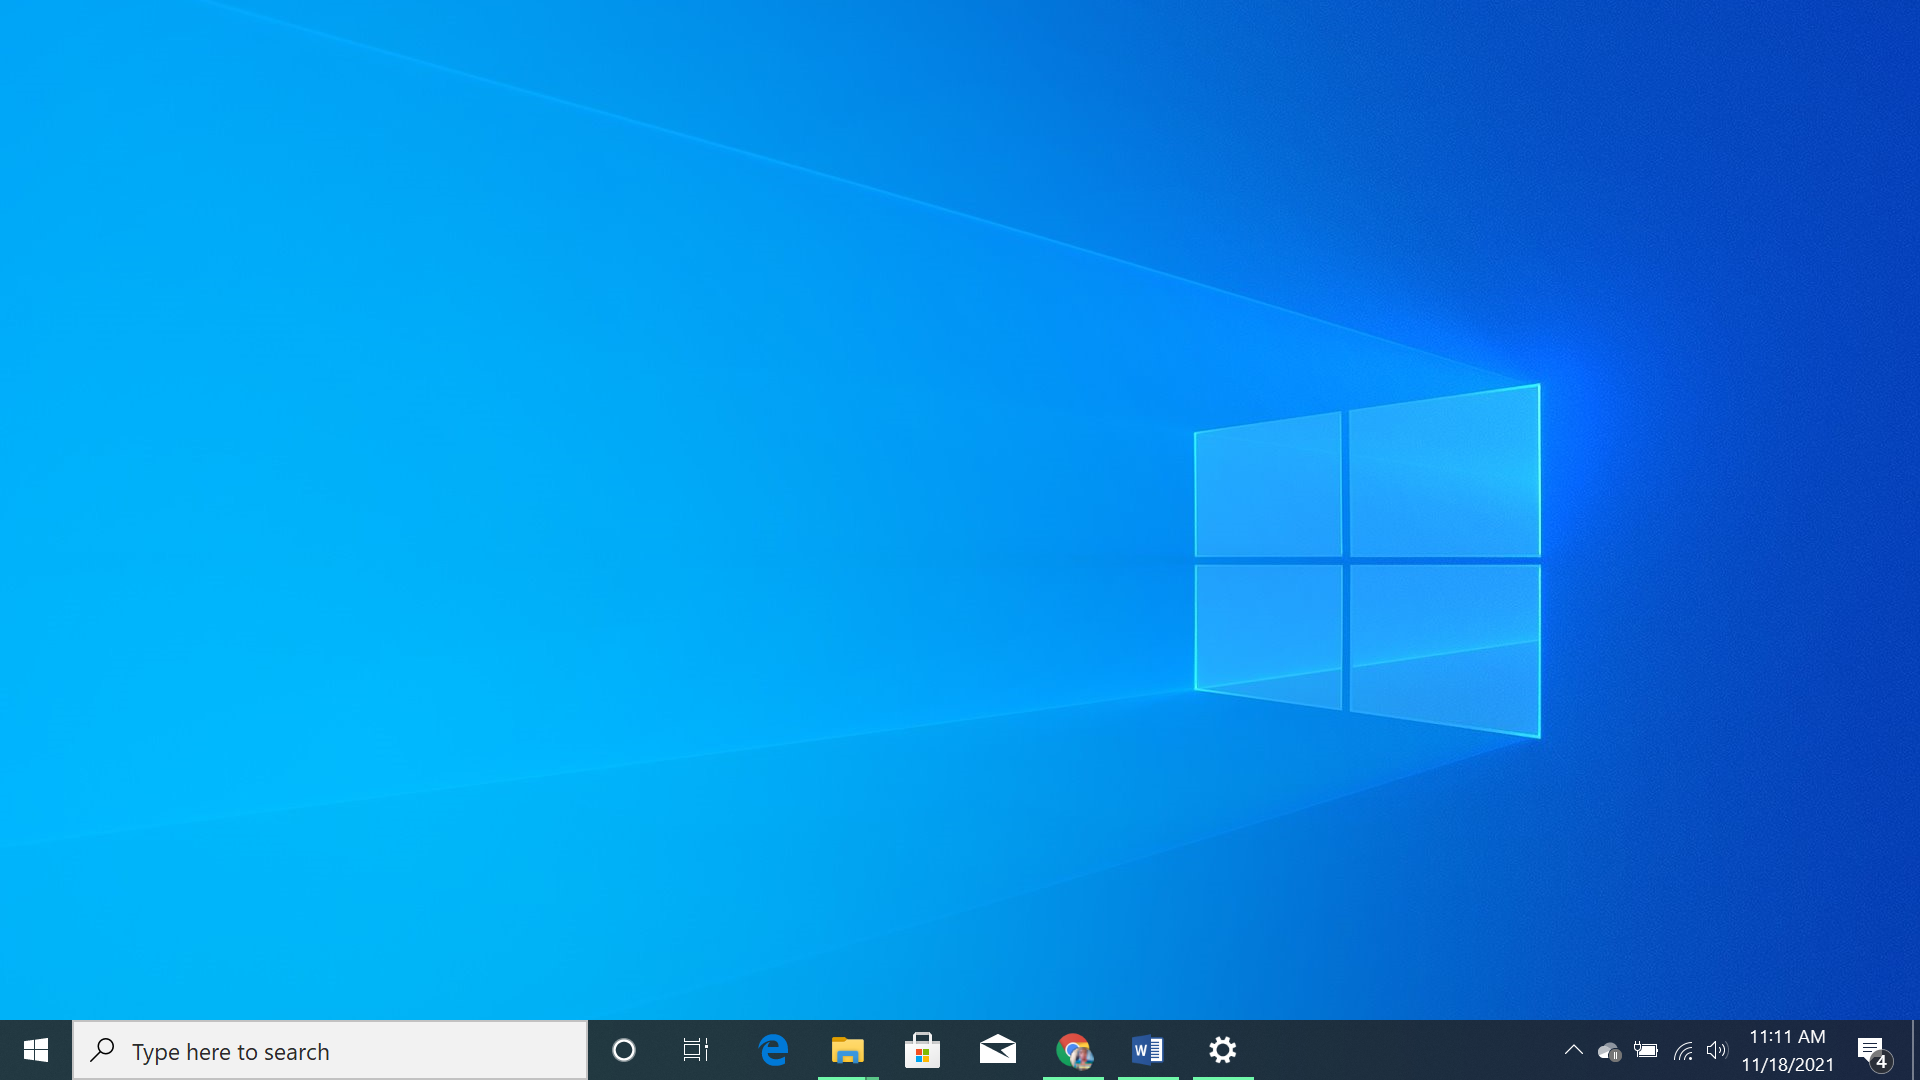 How to Customize Your Windows 10 Taskbar to Be More Productive